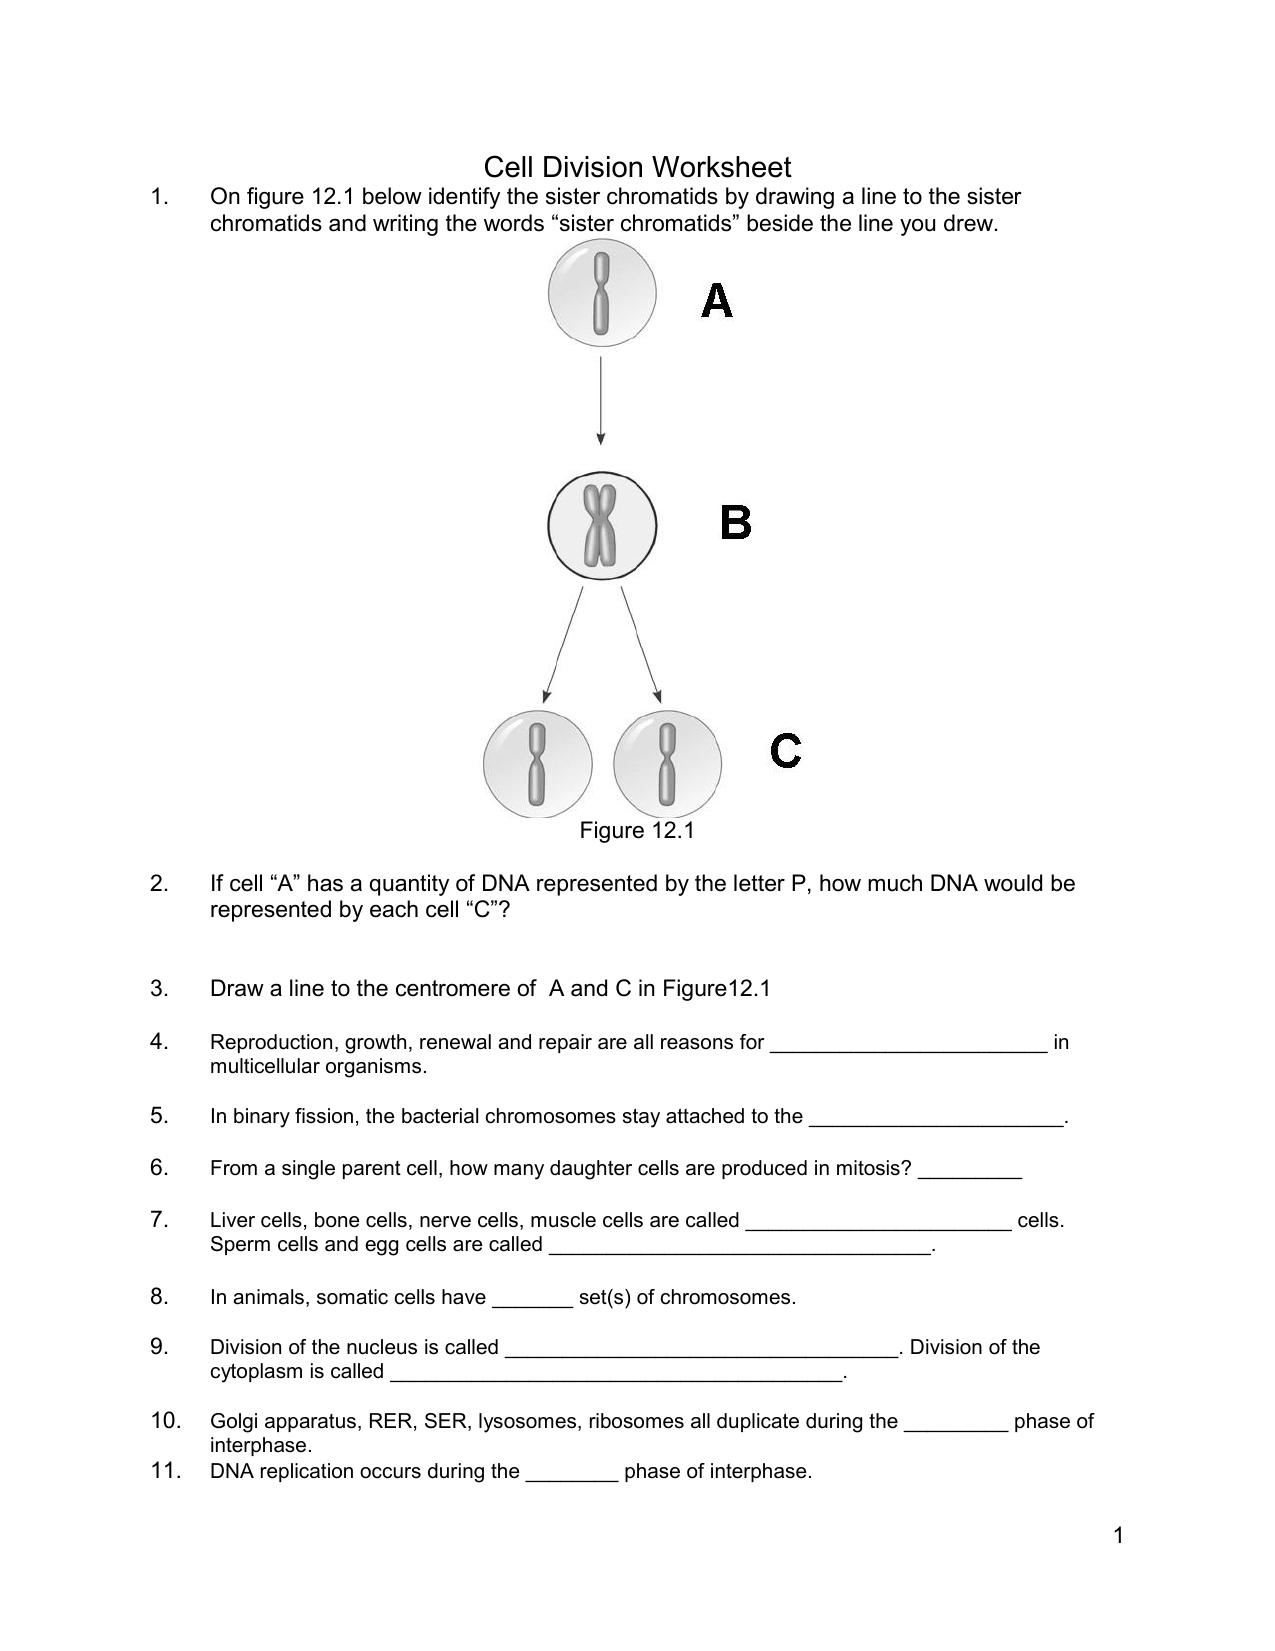 Cell Division Worksheet Intended For Cell Division Worksheet Answers